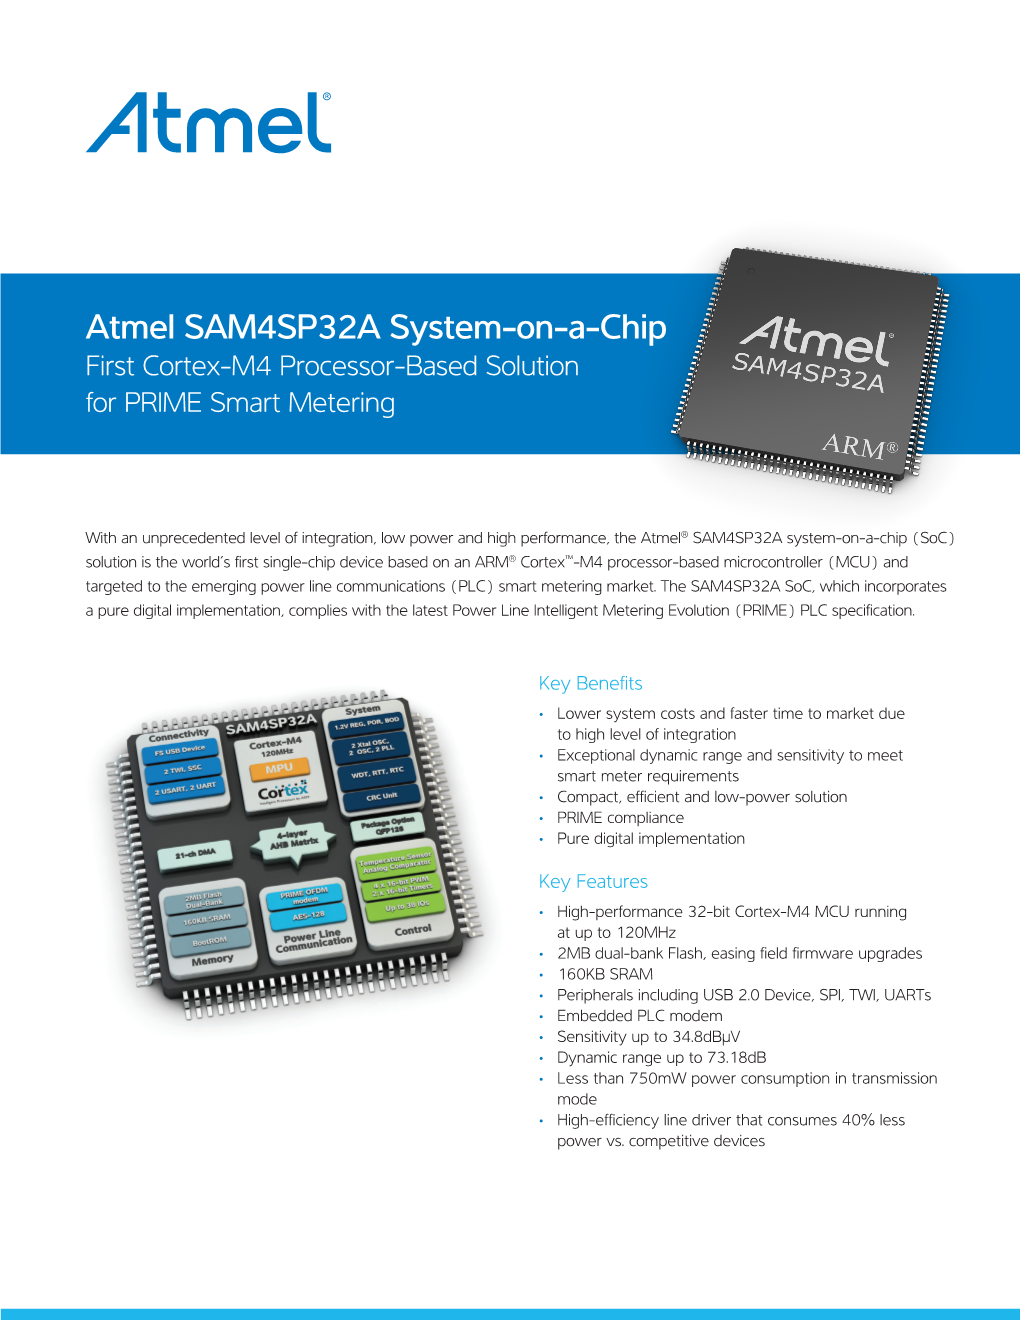 Atmel SAM4SP32A System-On-A-Chip First Cortex-M4 Processor-Based Solution for PRIME Smart Metering